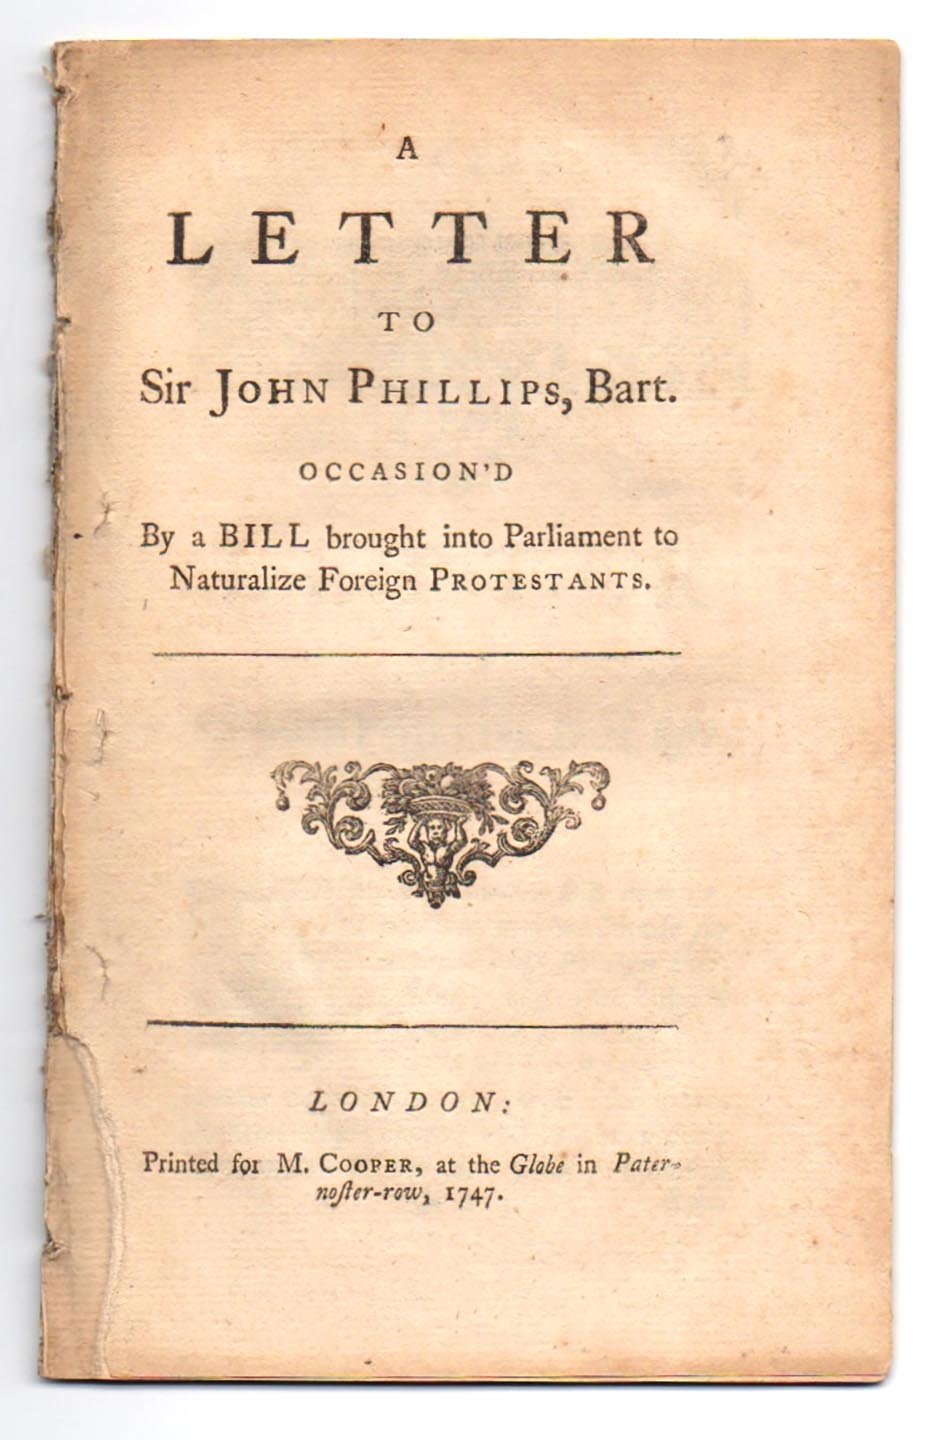 A Letter to Sir John Phillips, Bart. Occasiond by a Bill Brought into Parliament to Naturalize Foreign Protestants